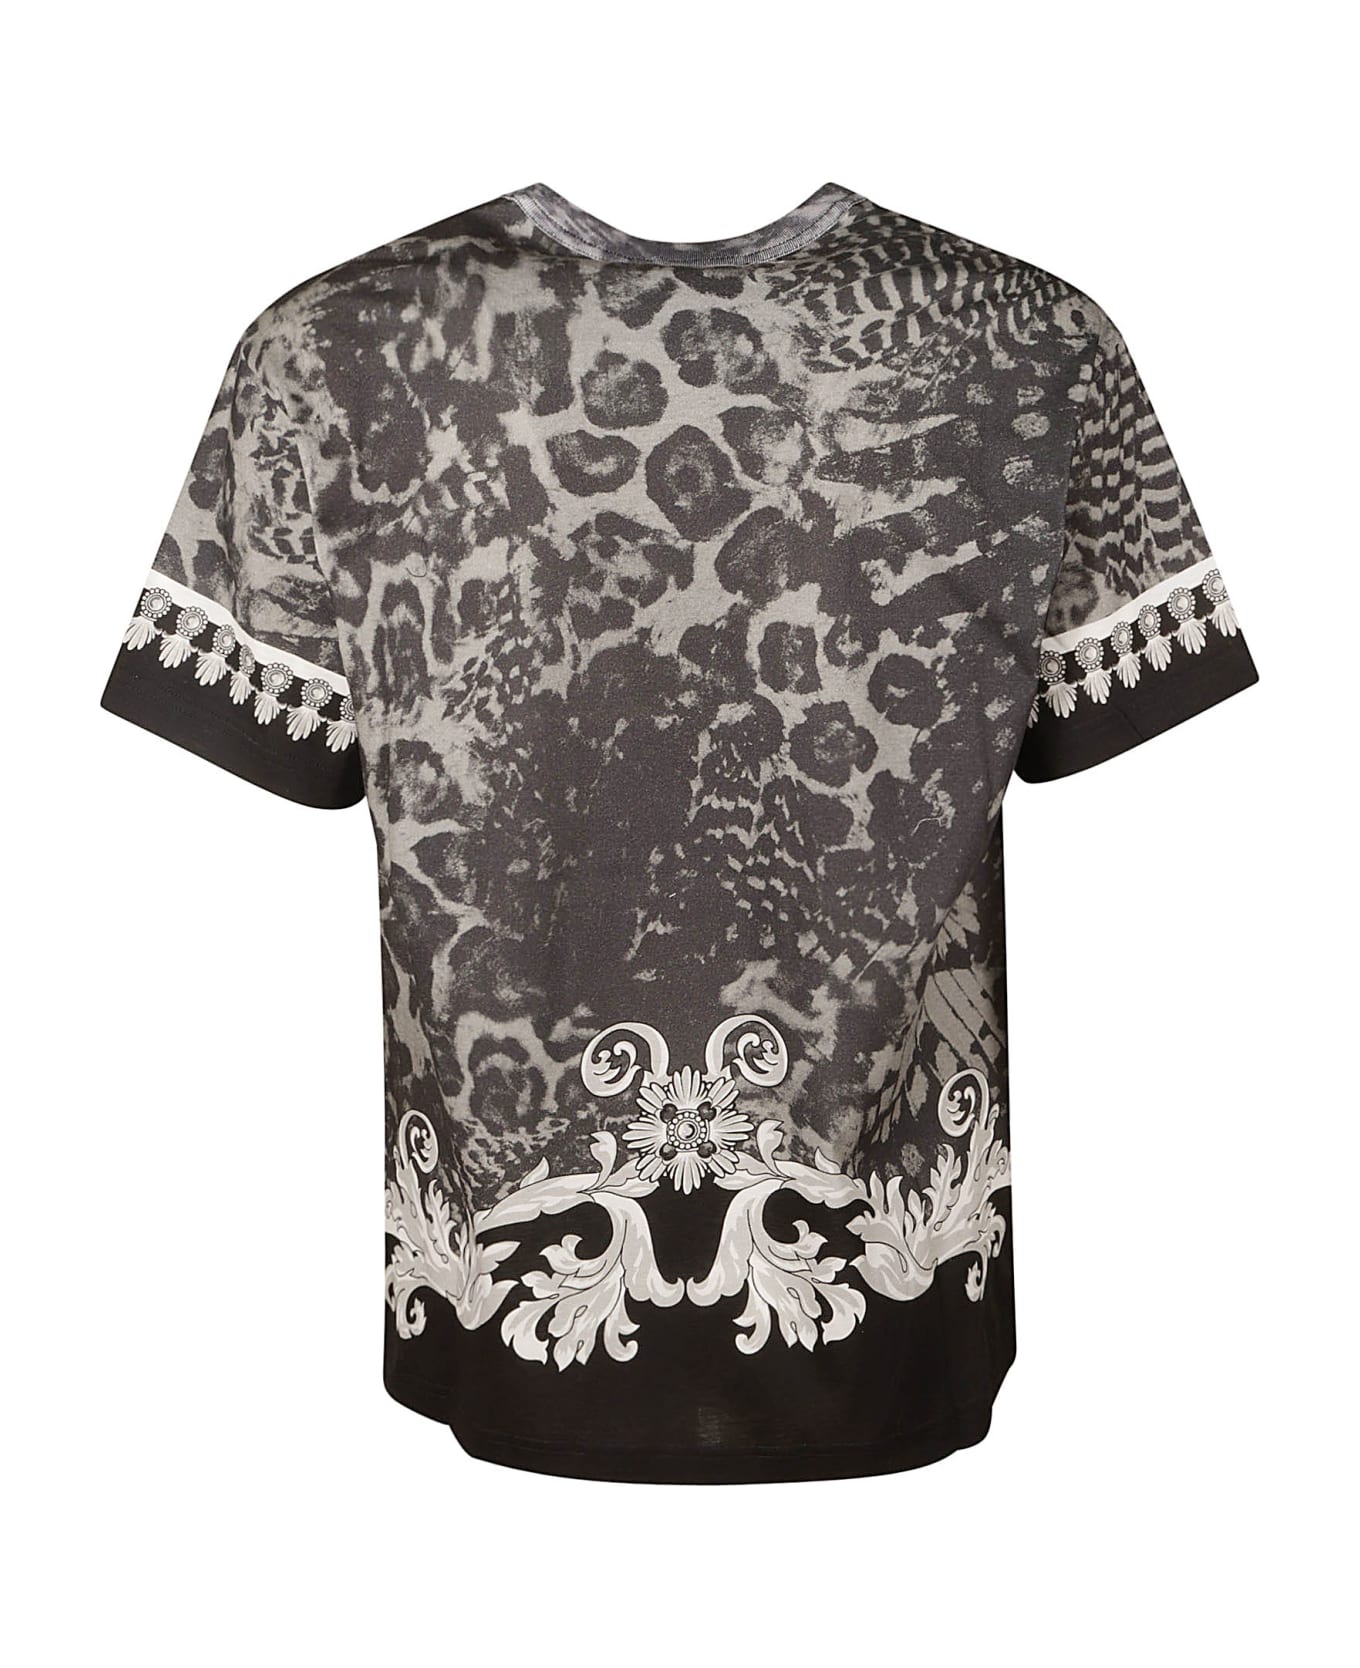 Versace Jeans Couture Couture Logo Print T-shirt - BLACK シャツ